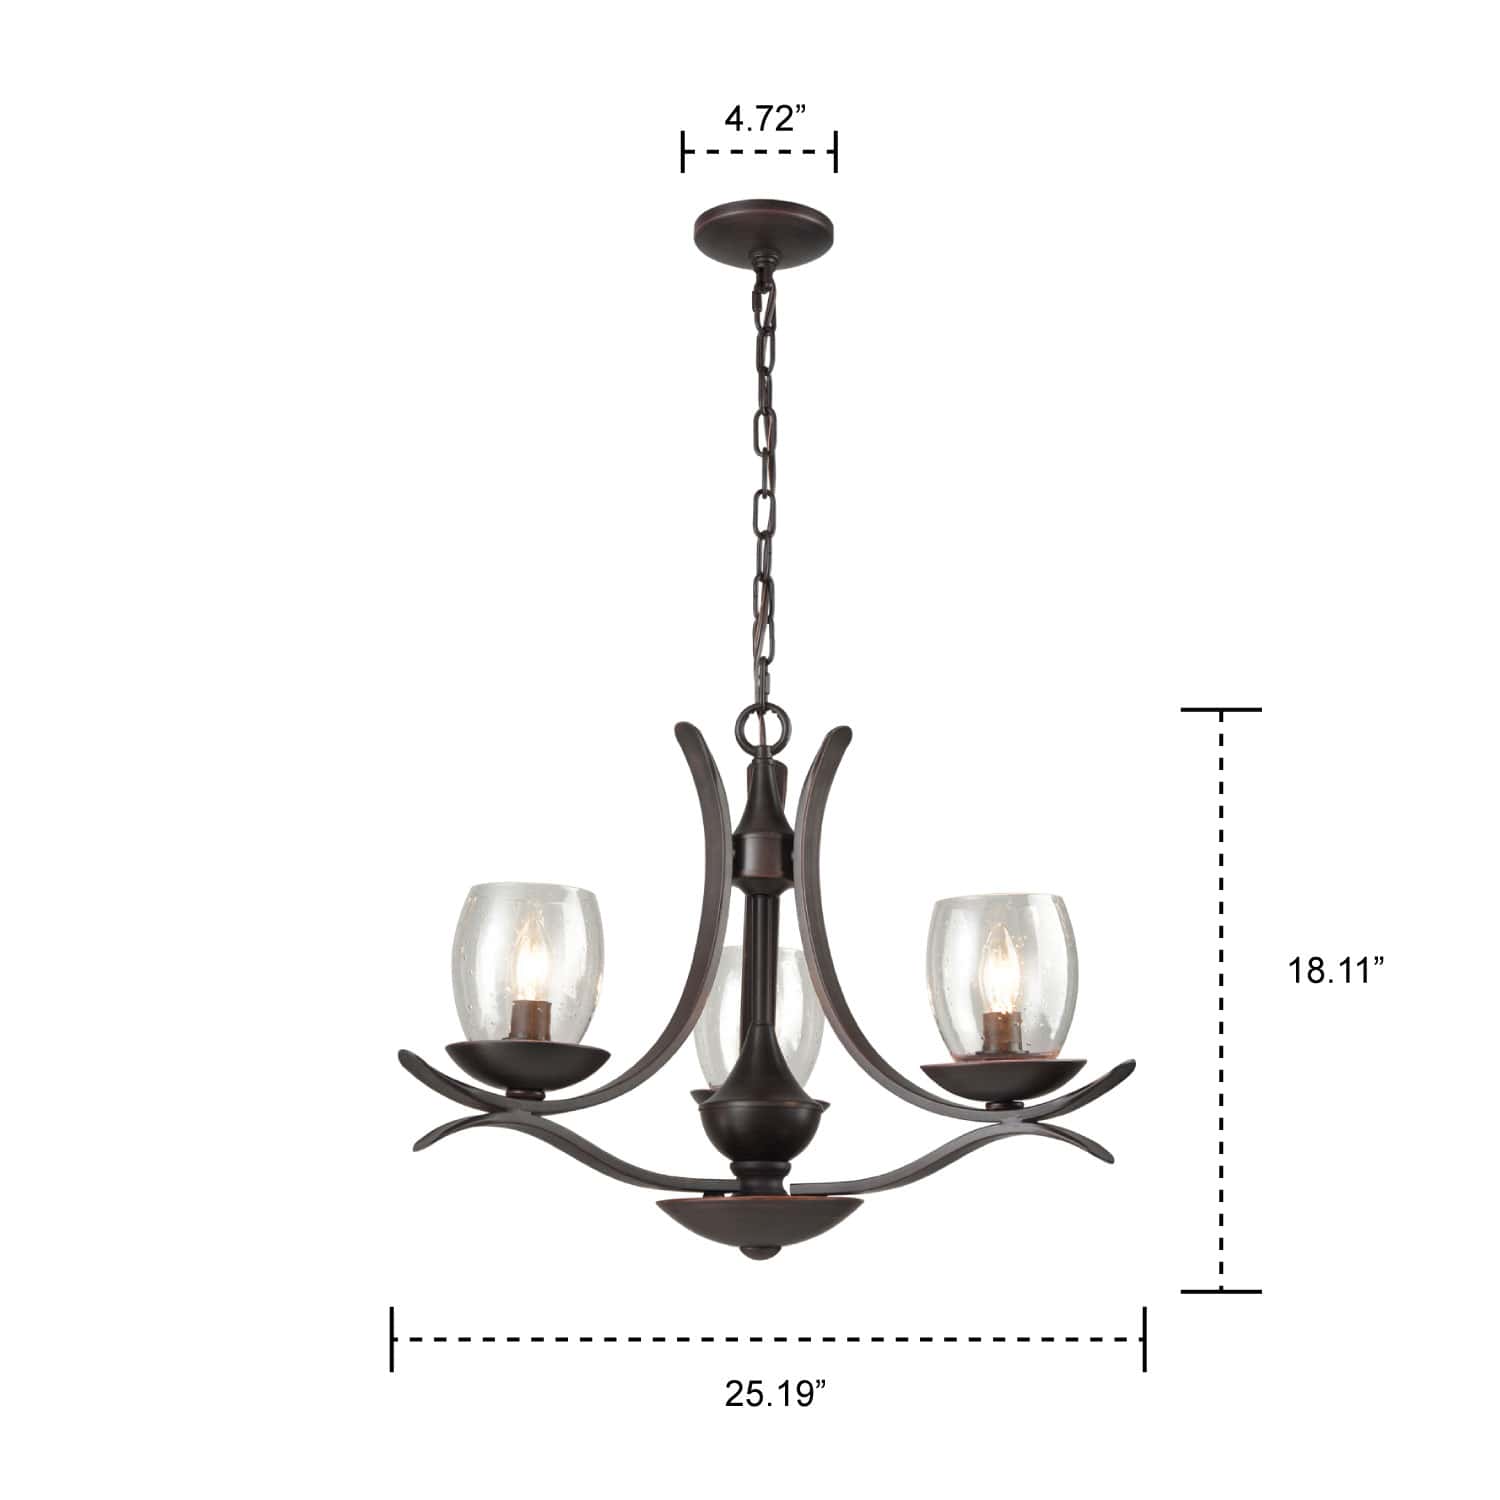 Rustic Bronze Dining Room Chandelier with Seeded Glass - 3 Light